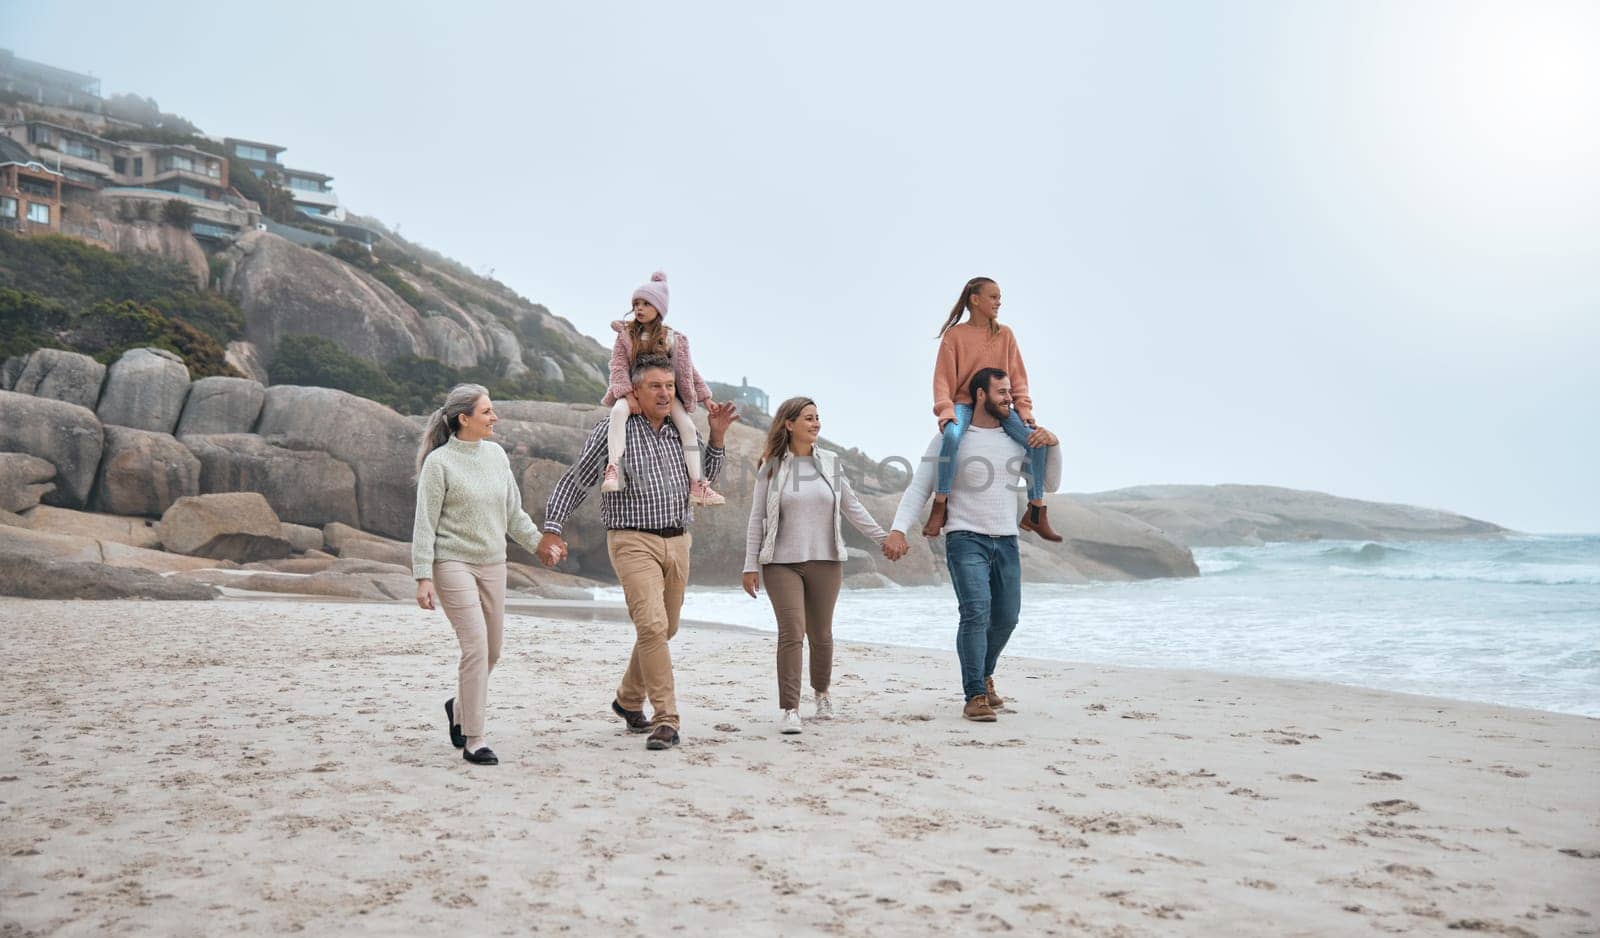 Family, walking and holding hands on beach holiday vacation. Happy grandparents, parents and children smile together for love trust bonding holiday or quality time adventure on sand ocean water.